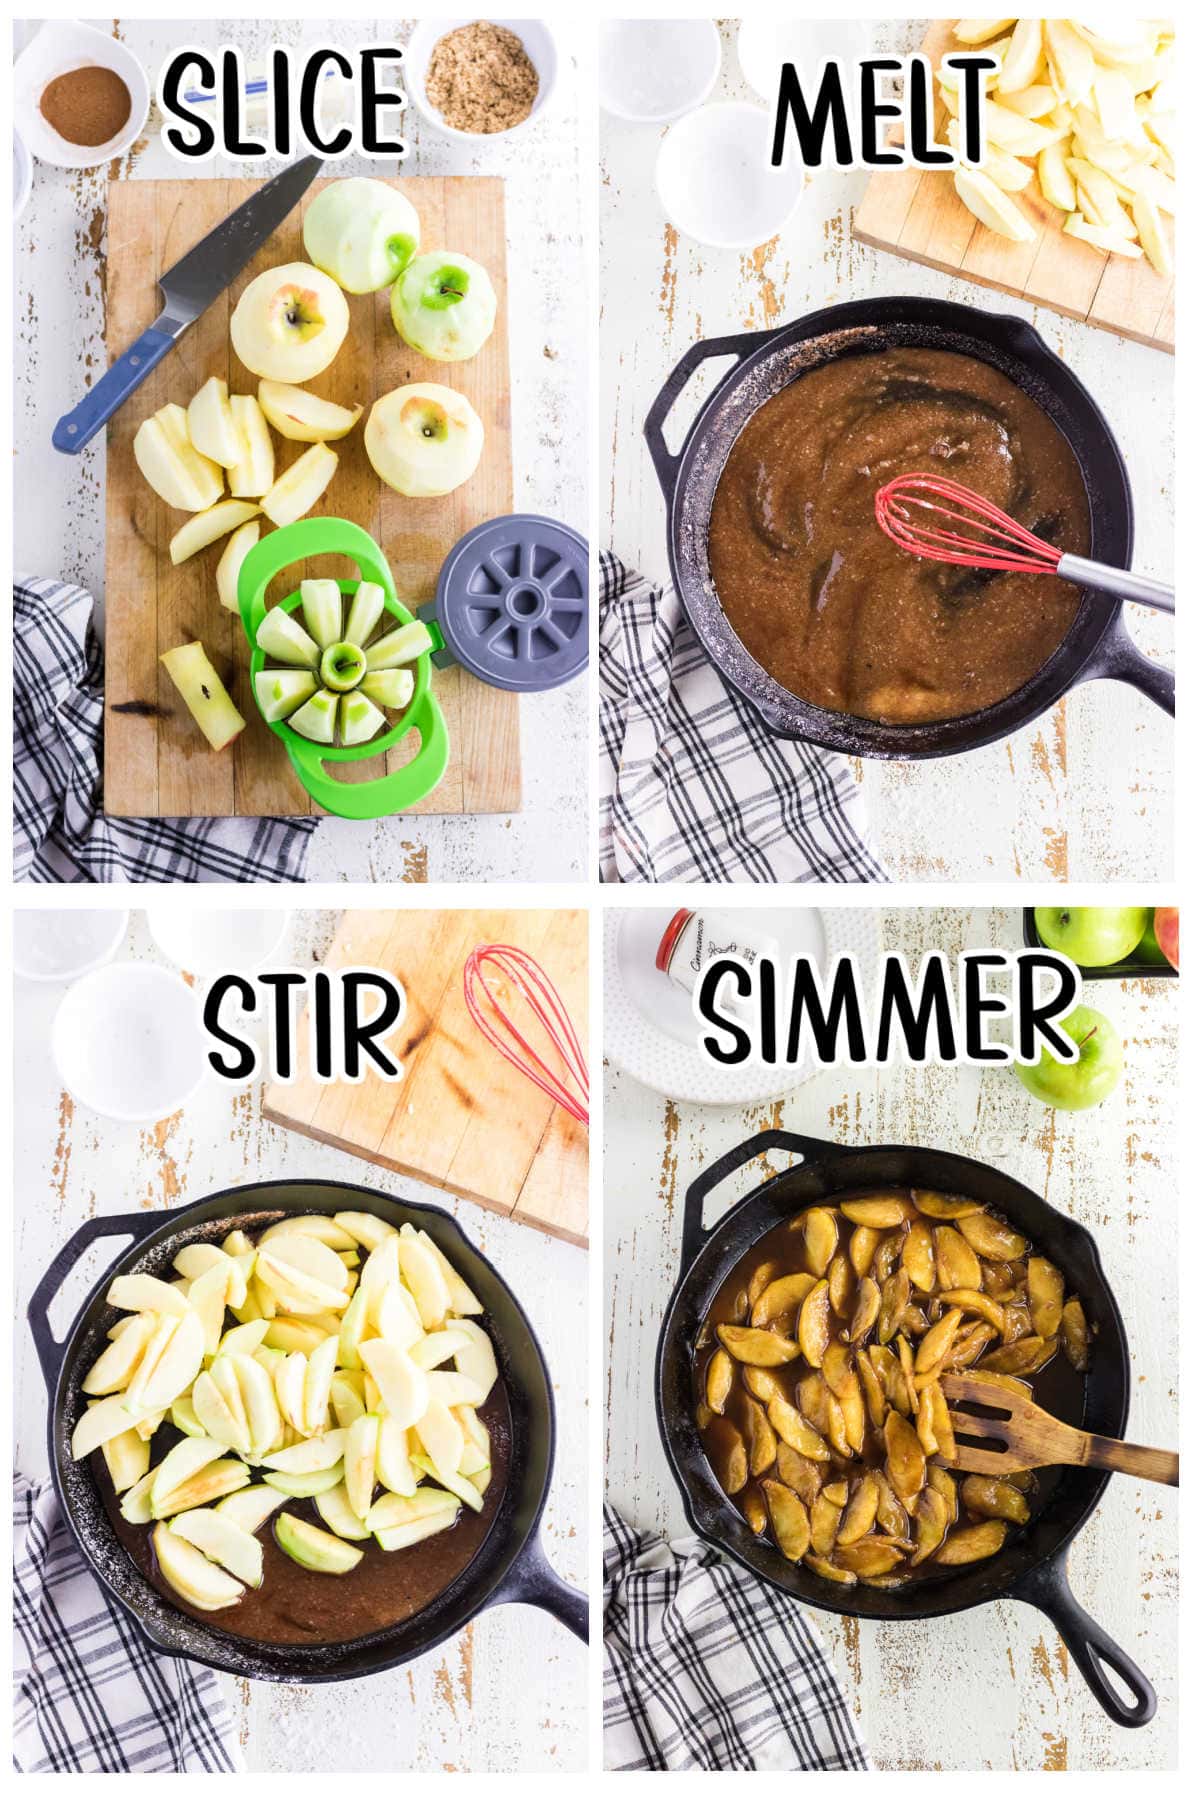 Step by step images showing how to make fried apples.